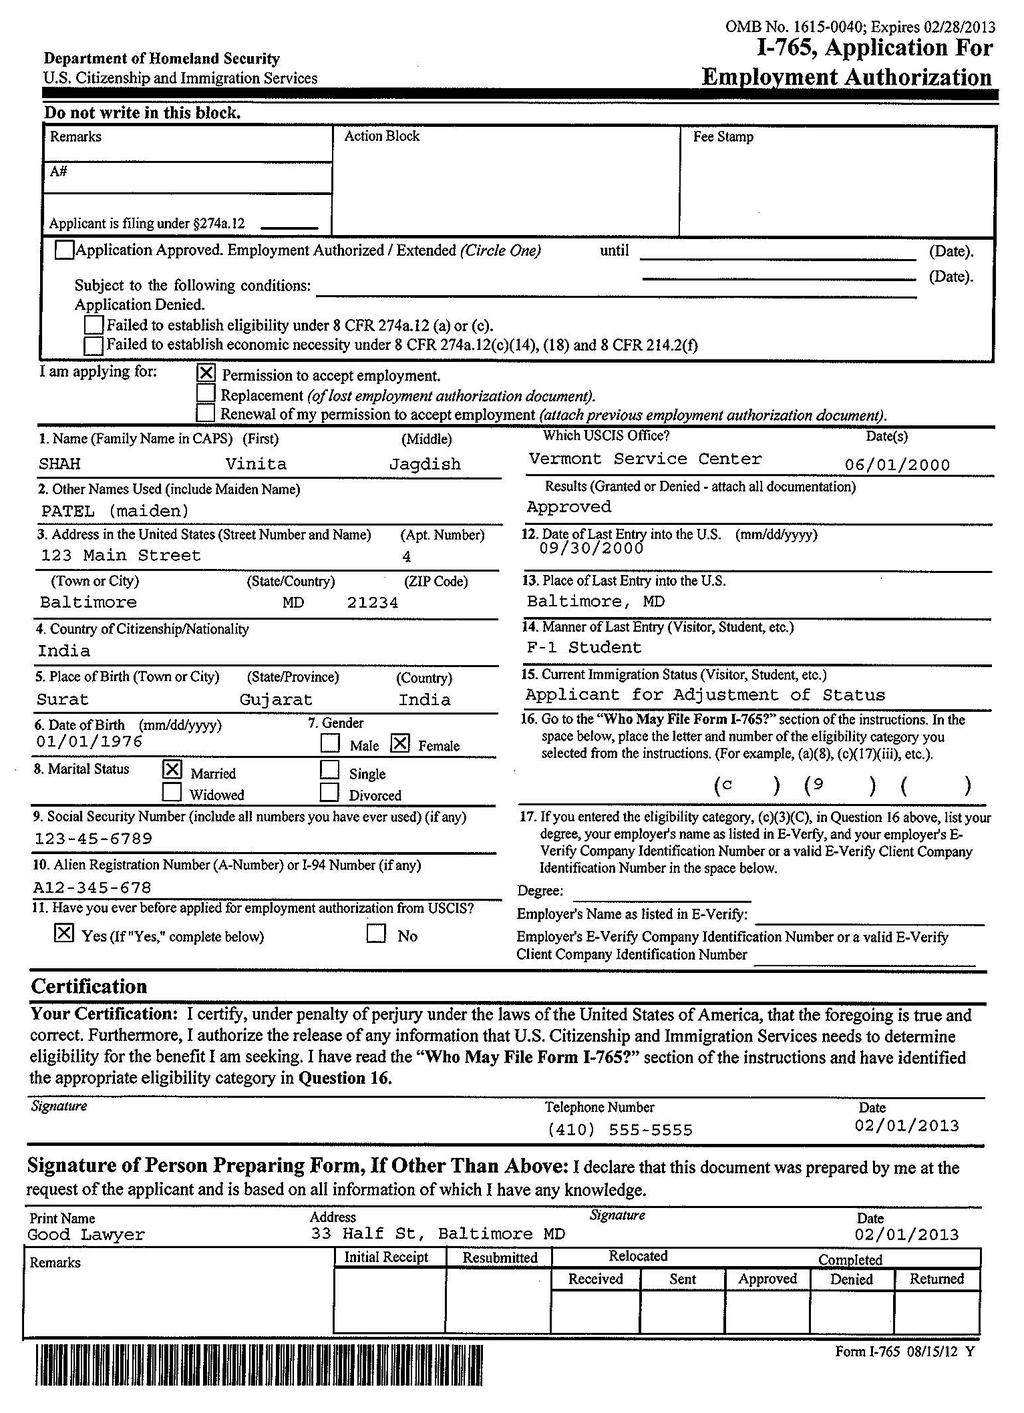 COMPLETING FORM I-765, APPLICATION FOR EMPLOYMENT